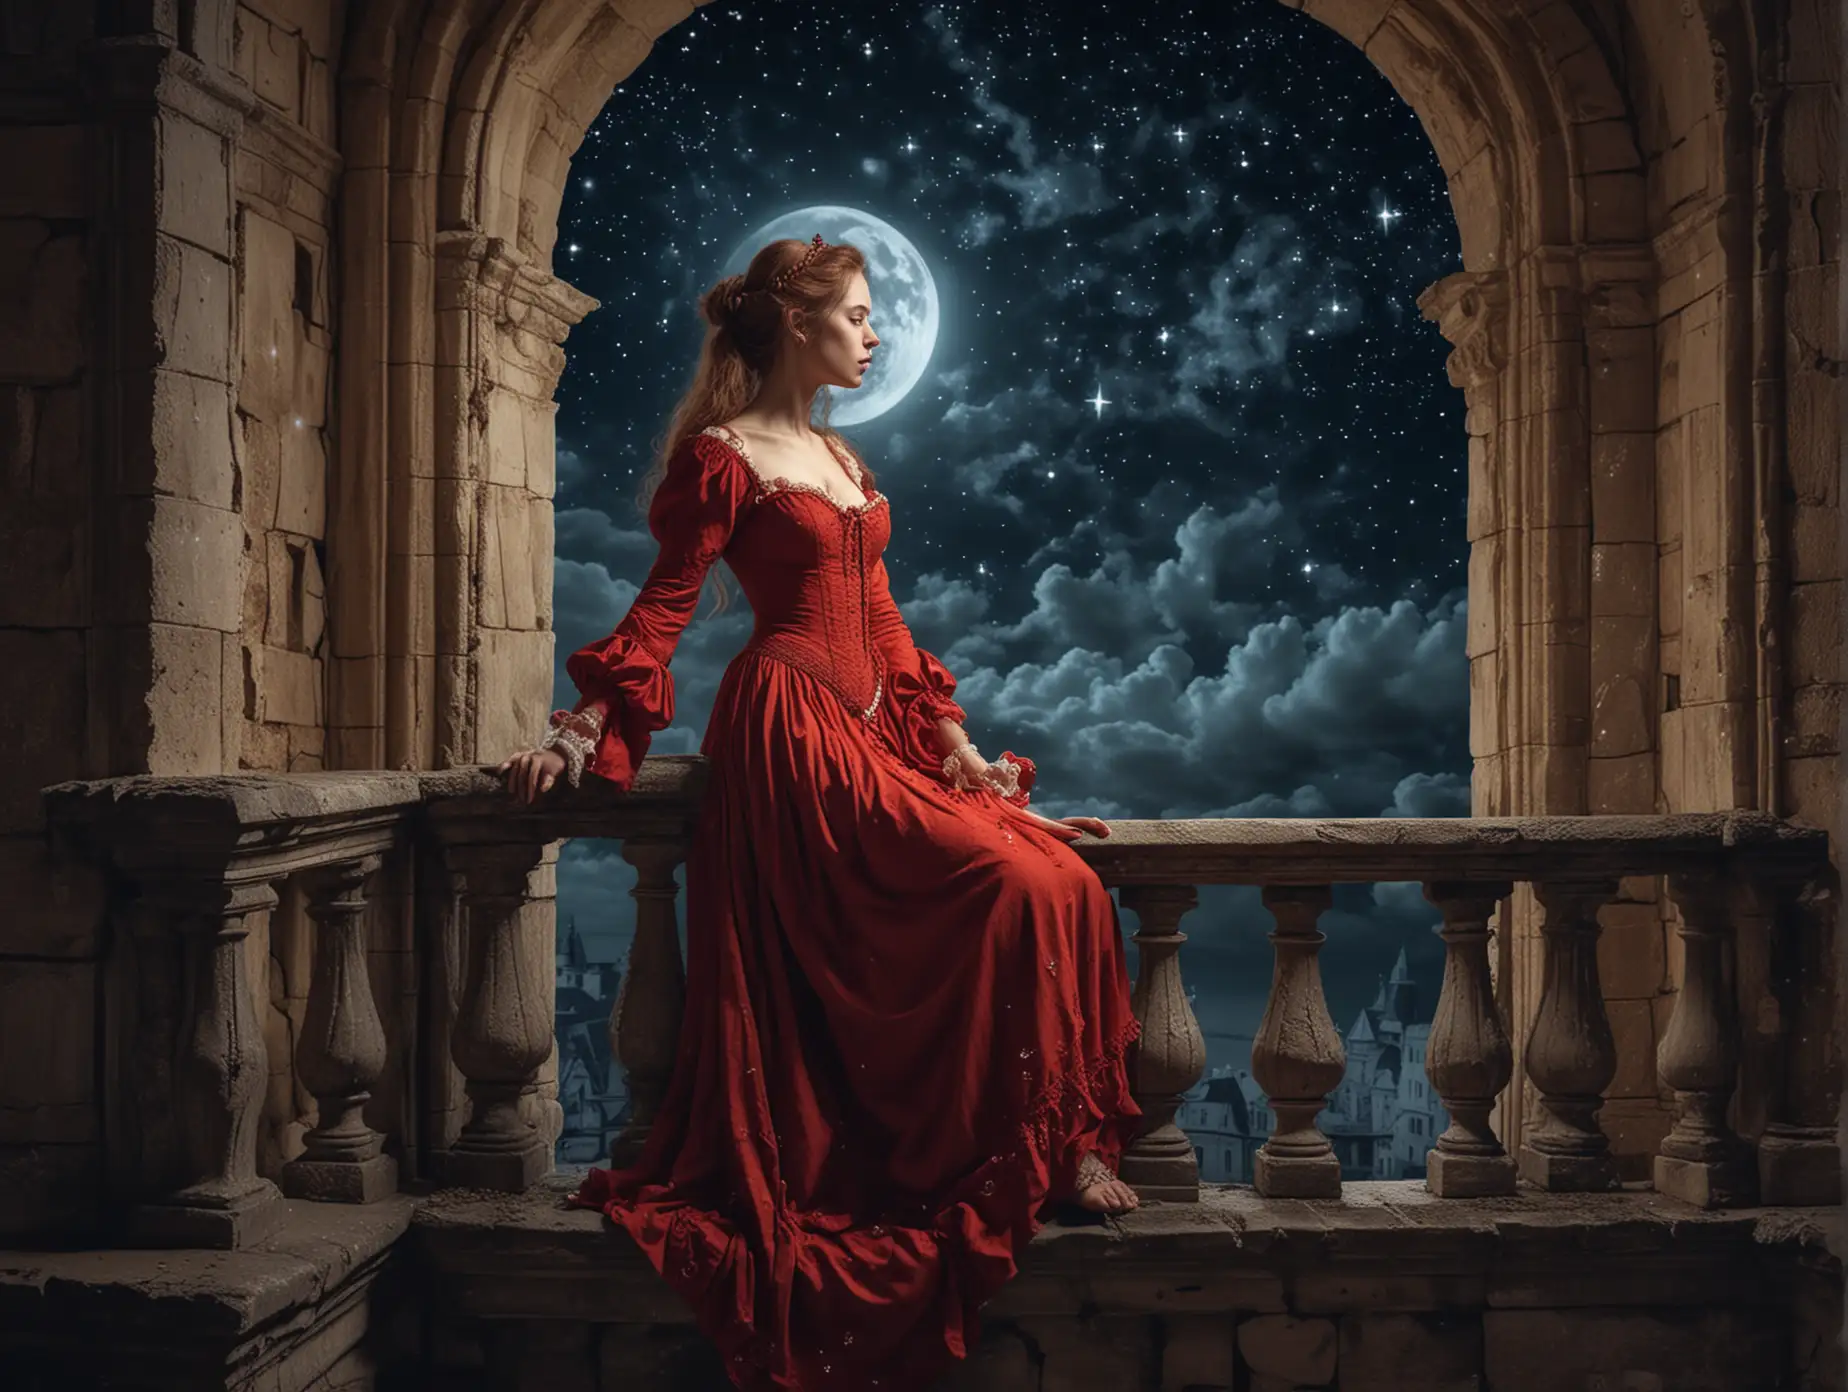 Red-Maiden-on-Balcony-Lunar-Night-at-Old-Castle-in-Baroque-Style